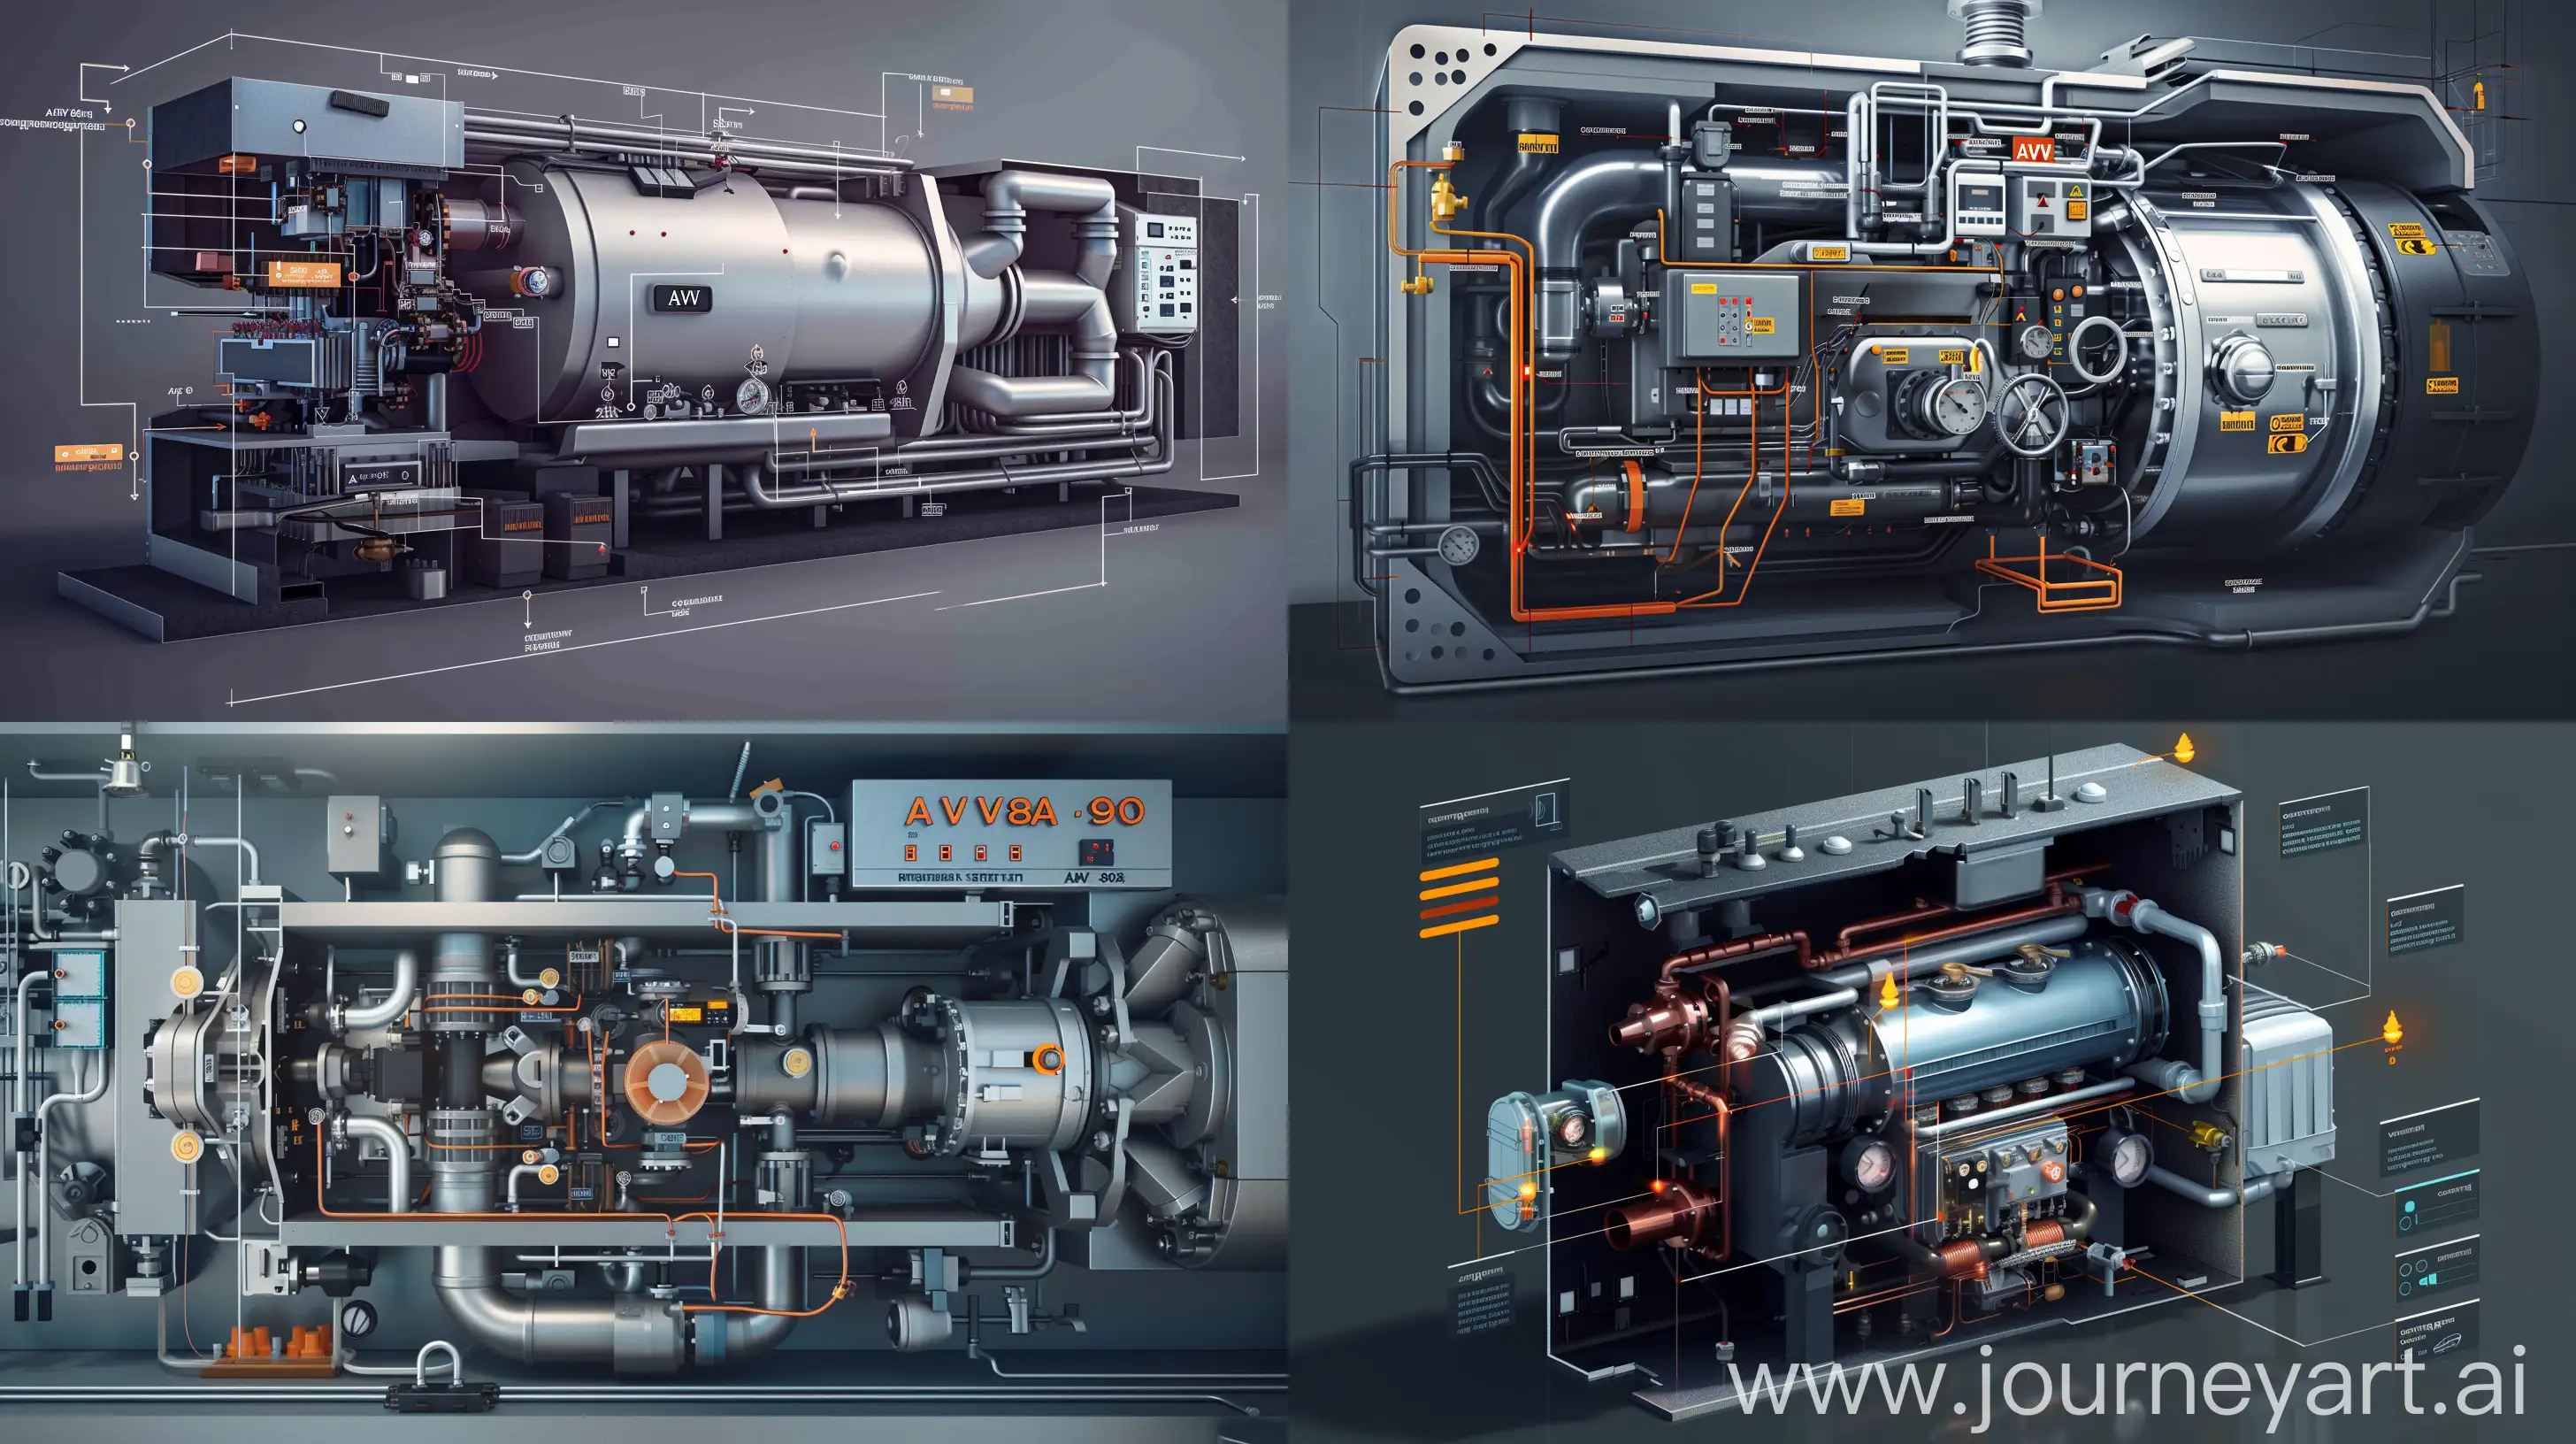 A detailed conceptual illustration representing the inner workings and key characteristics of the AGV 80 gas boiler, translated from Russian. The image showcases a cross-sectional view of the boiler, revealing its internal structure and functionality with labeled components such as heat exchangers, burners, control panels, and circulation pumps. The visualization highlights the advantages and disadvantages of the AGV 80 compared to similar models, emphasizing factors like energy efficiency, maintenance requirements, and performance. The scene is rendered with a technical aesthetic, utilizing a color palette that contrasts metallic components with functional indicators. This composition aims to convey the complexity and design sophistication of the AGV 80, offering insights into its market price and availability.  --ar 16:9